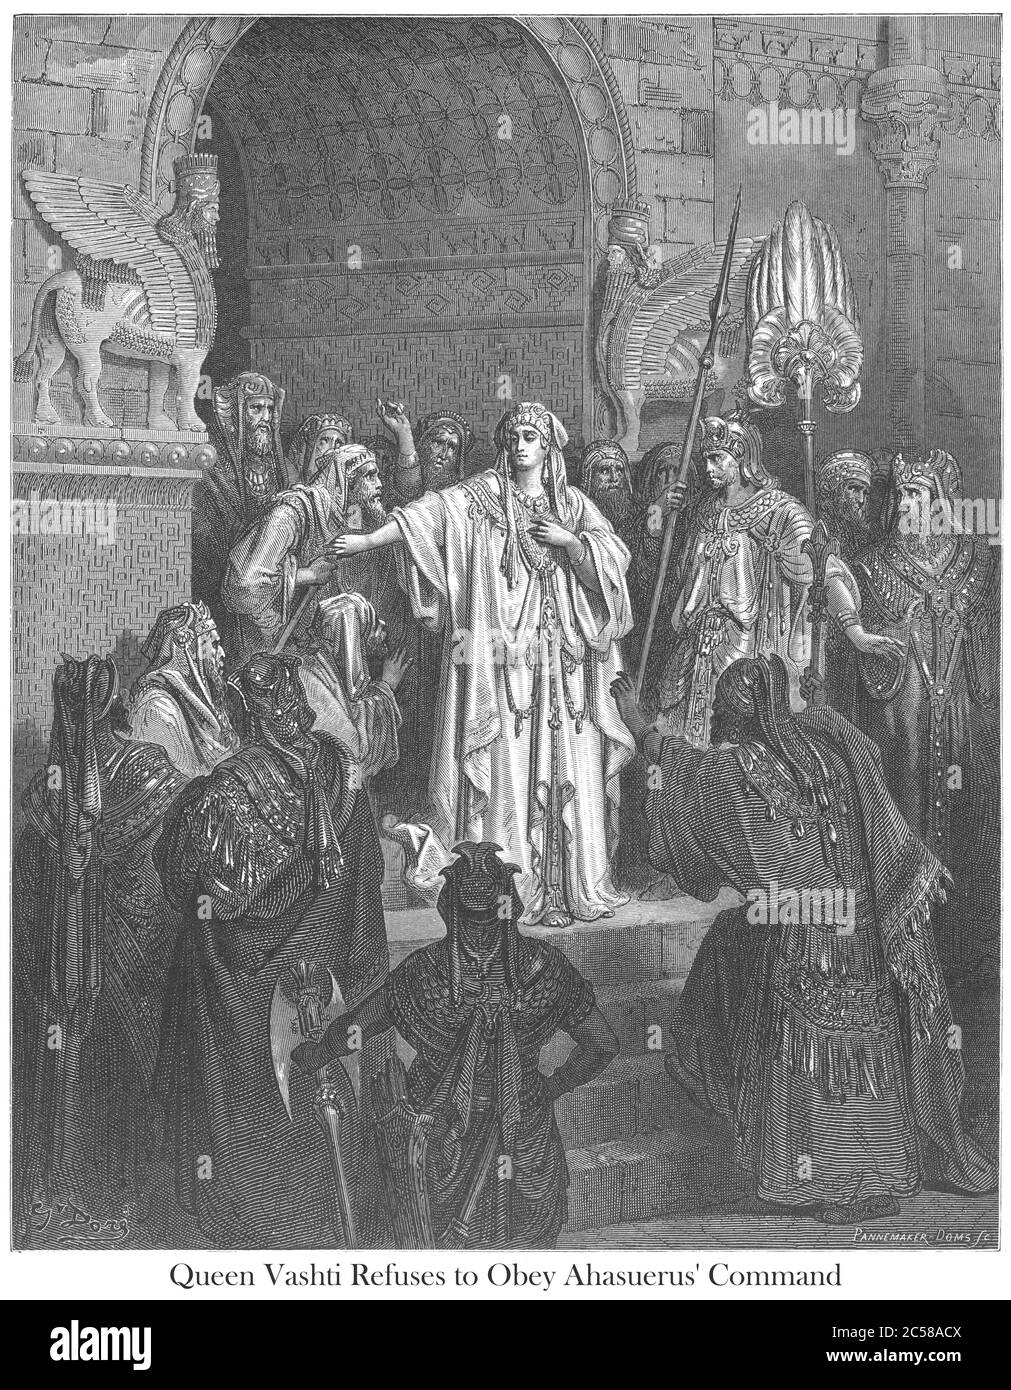 Queen Vashti Refusing to Obey King Ahasuerus [Esther 1:11-12] From the book 'Bible Gallery' Illustrated by Gustave Dore with Memoir of Dore and Descriptive Letter-press by Talbot W. Chambers D.D. Published by Cassell & Company Limited in London and simultaneously by Mame in Tours, France in 1866 Stock Photo